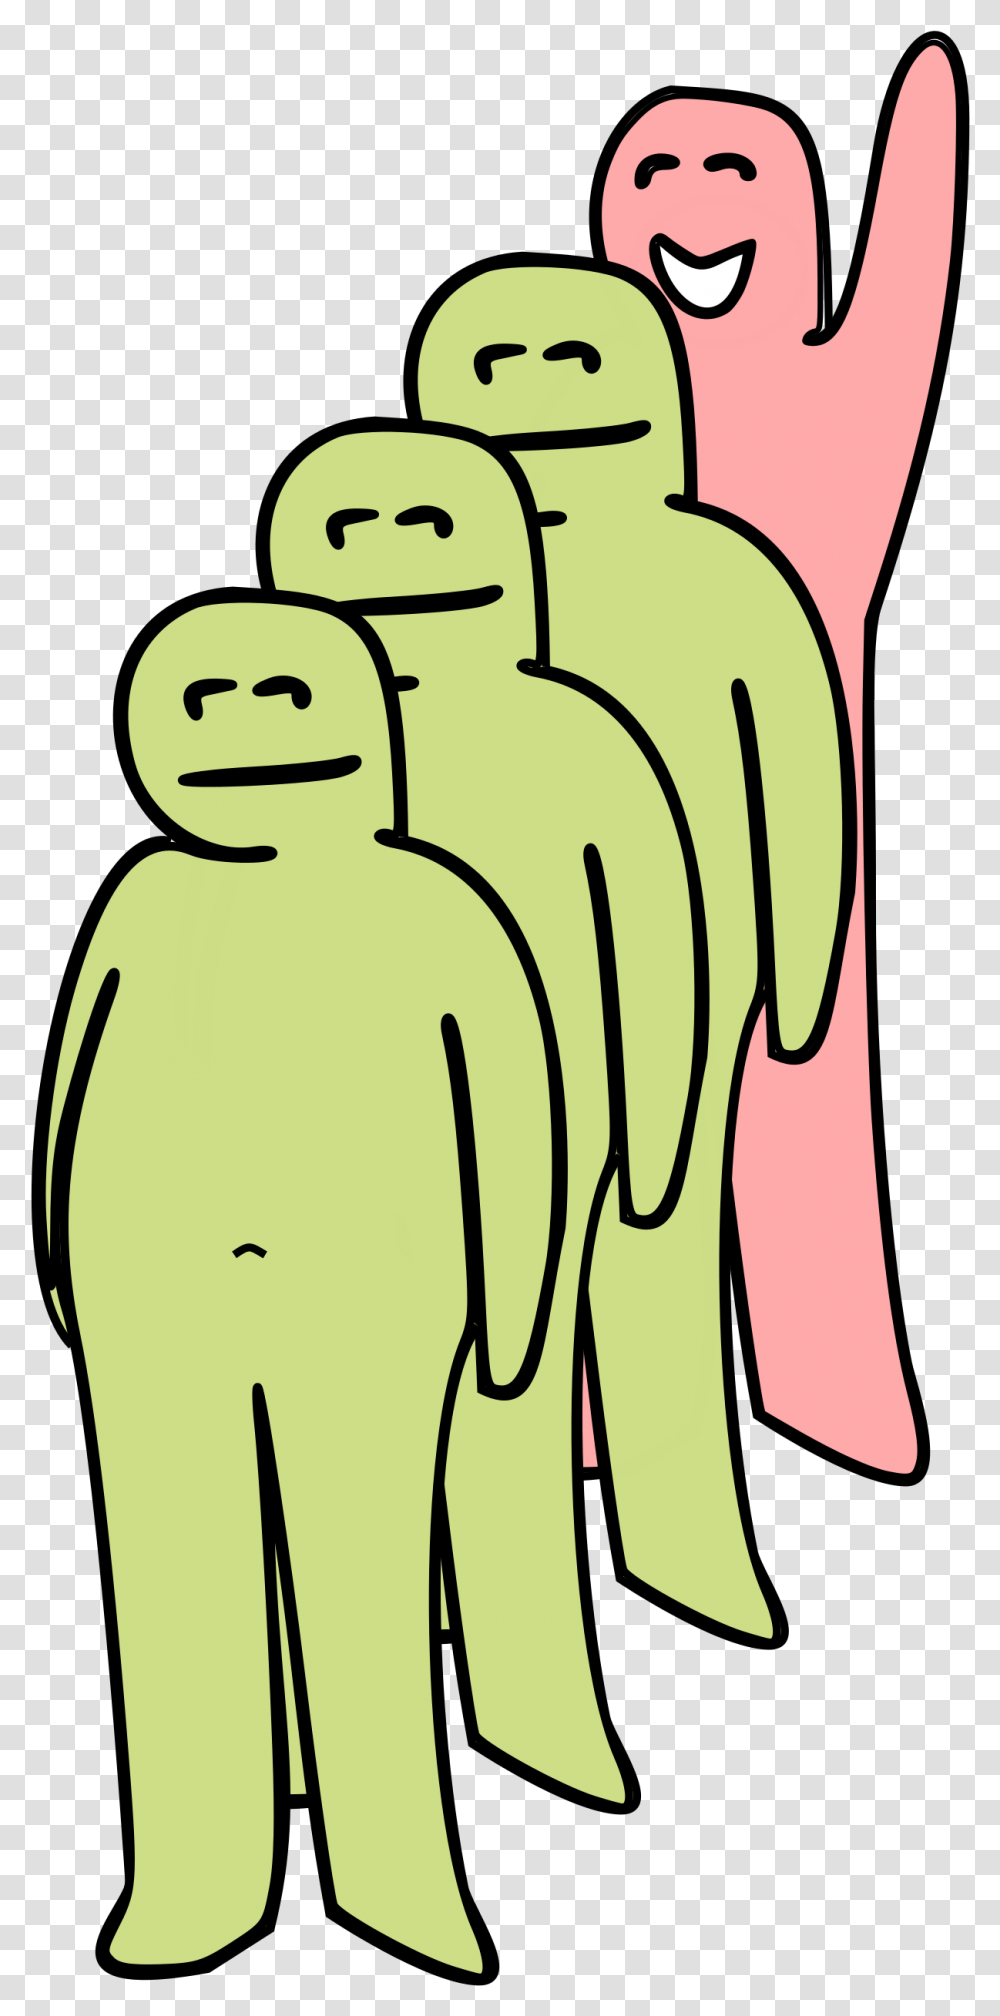 Three Green Smiling Human Figures Standing In A Line Standing Around, Outdoors, Snowman, Nature, Art Transparent Png